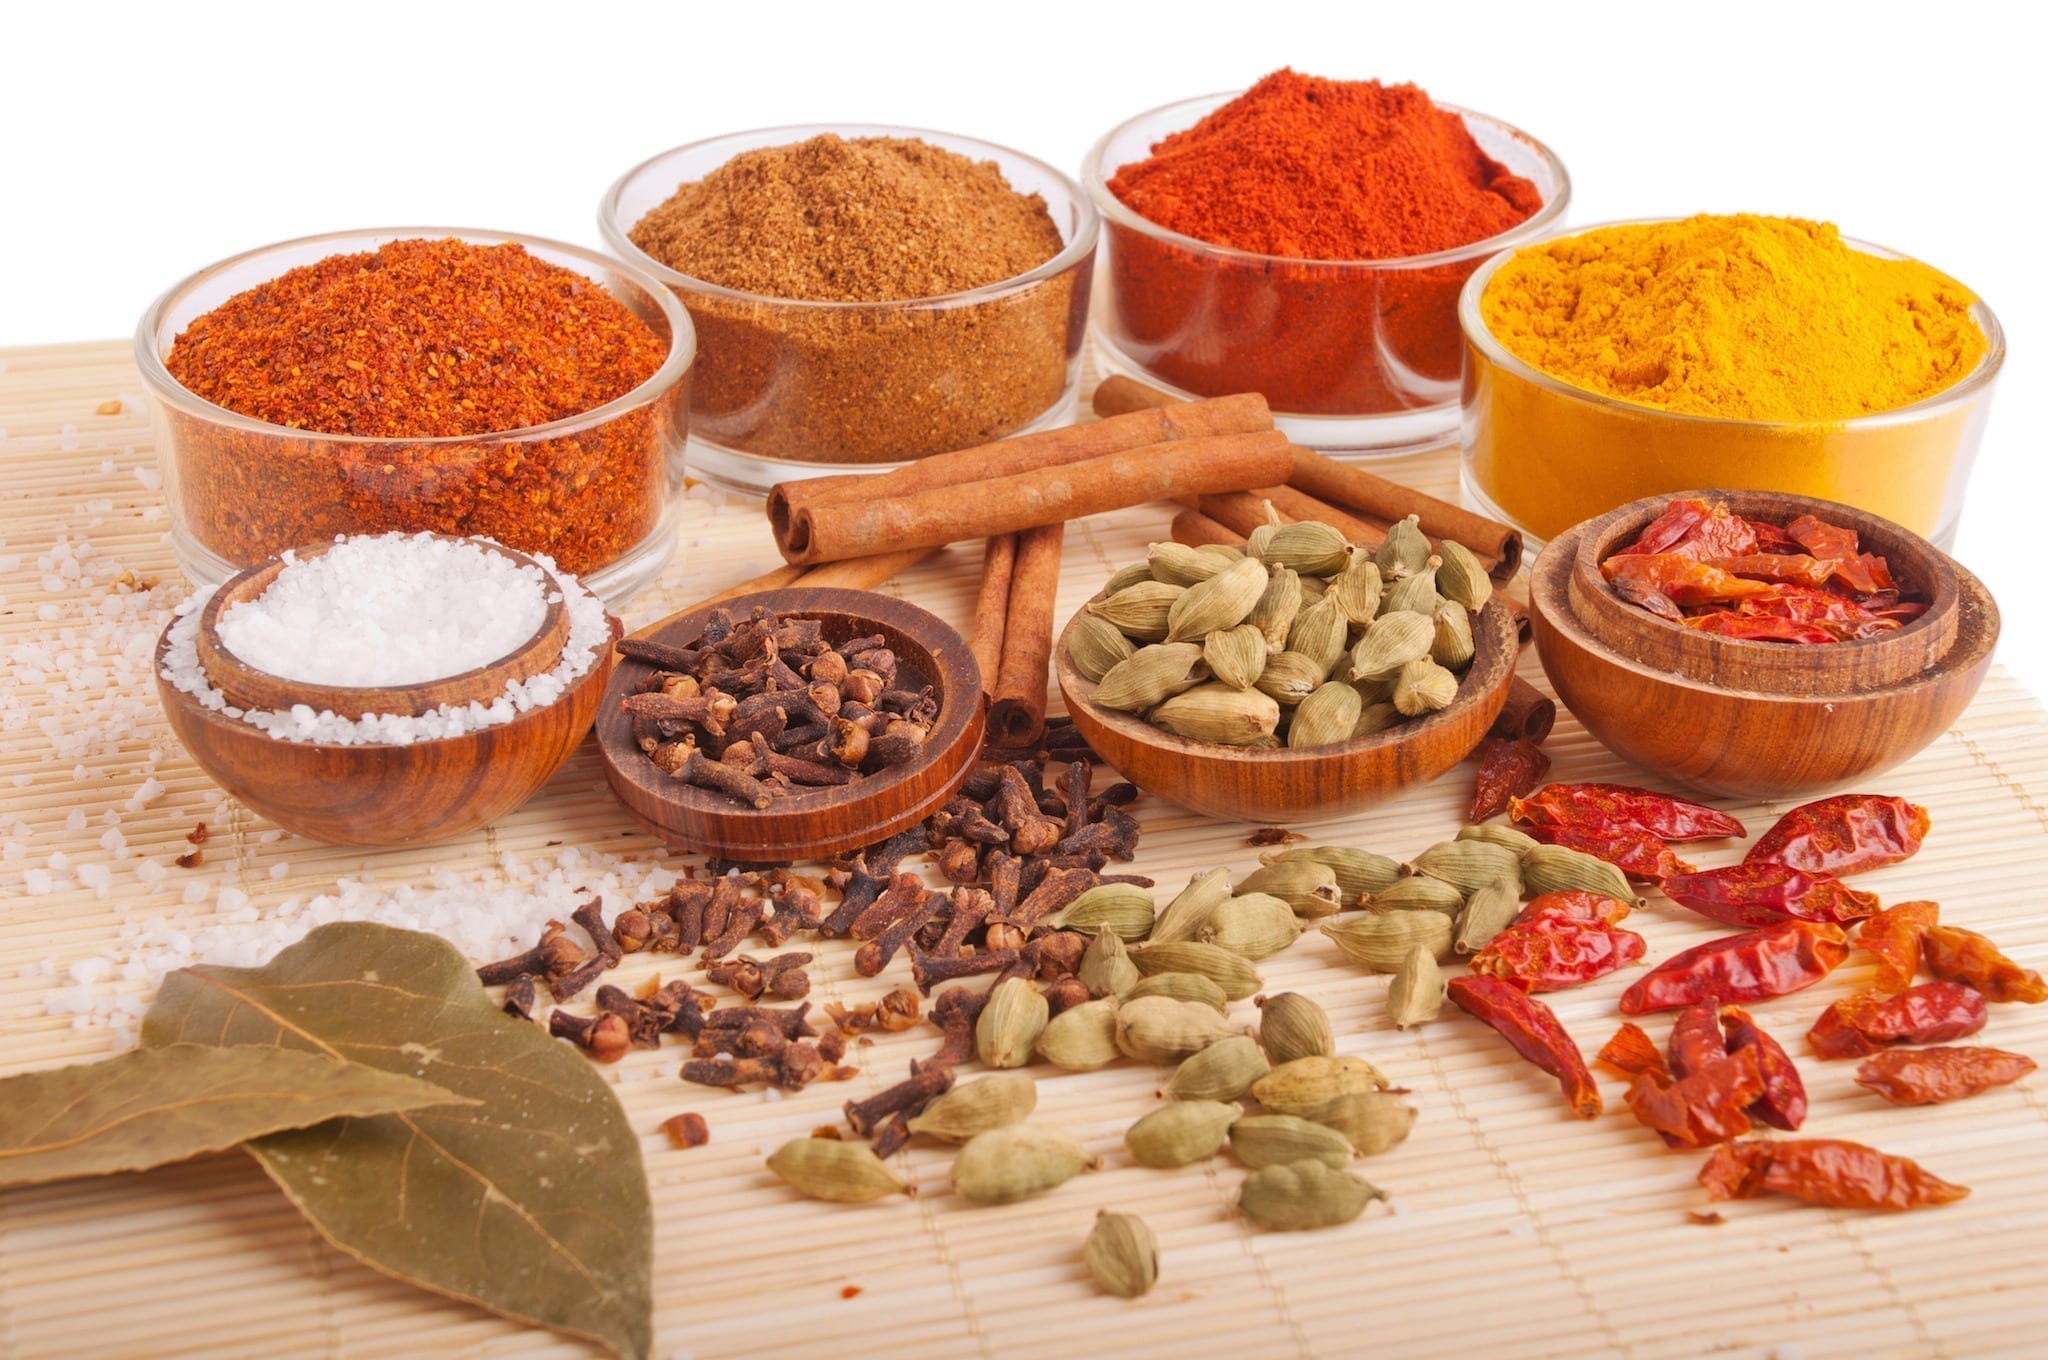 Spices and herbs vegan pantry staples